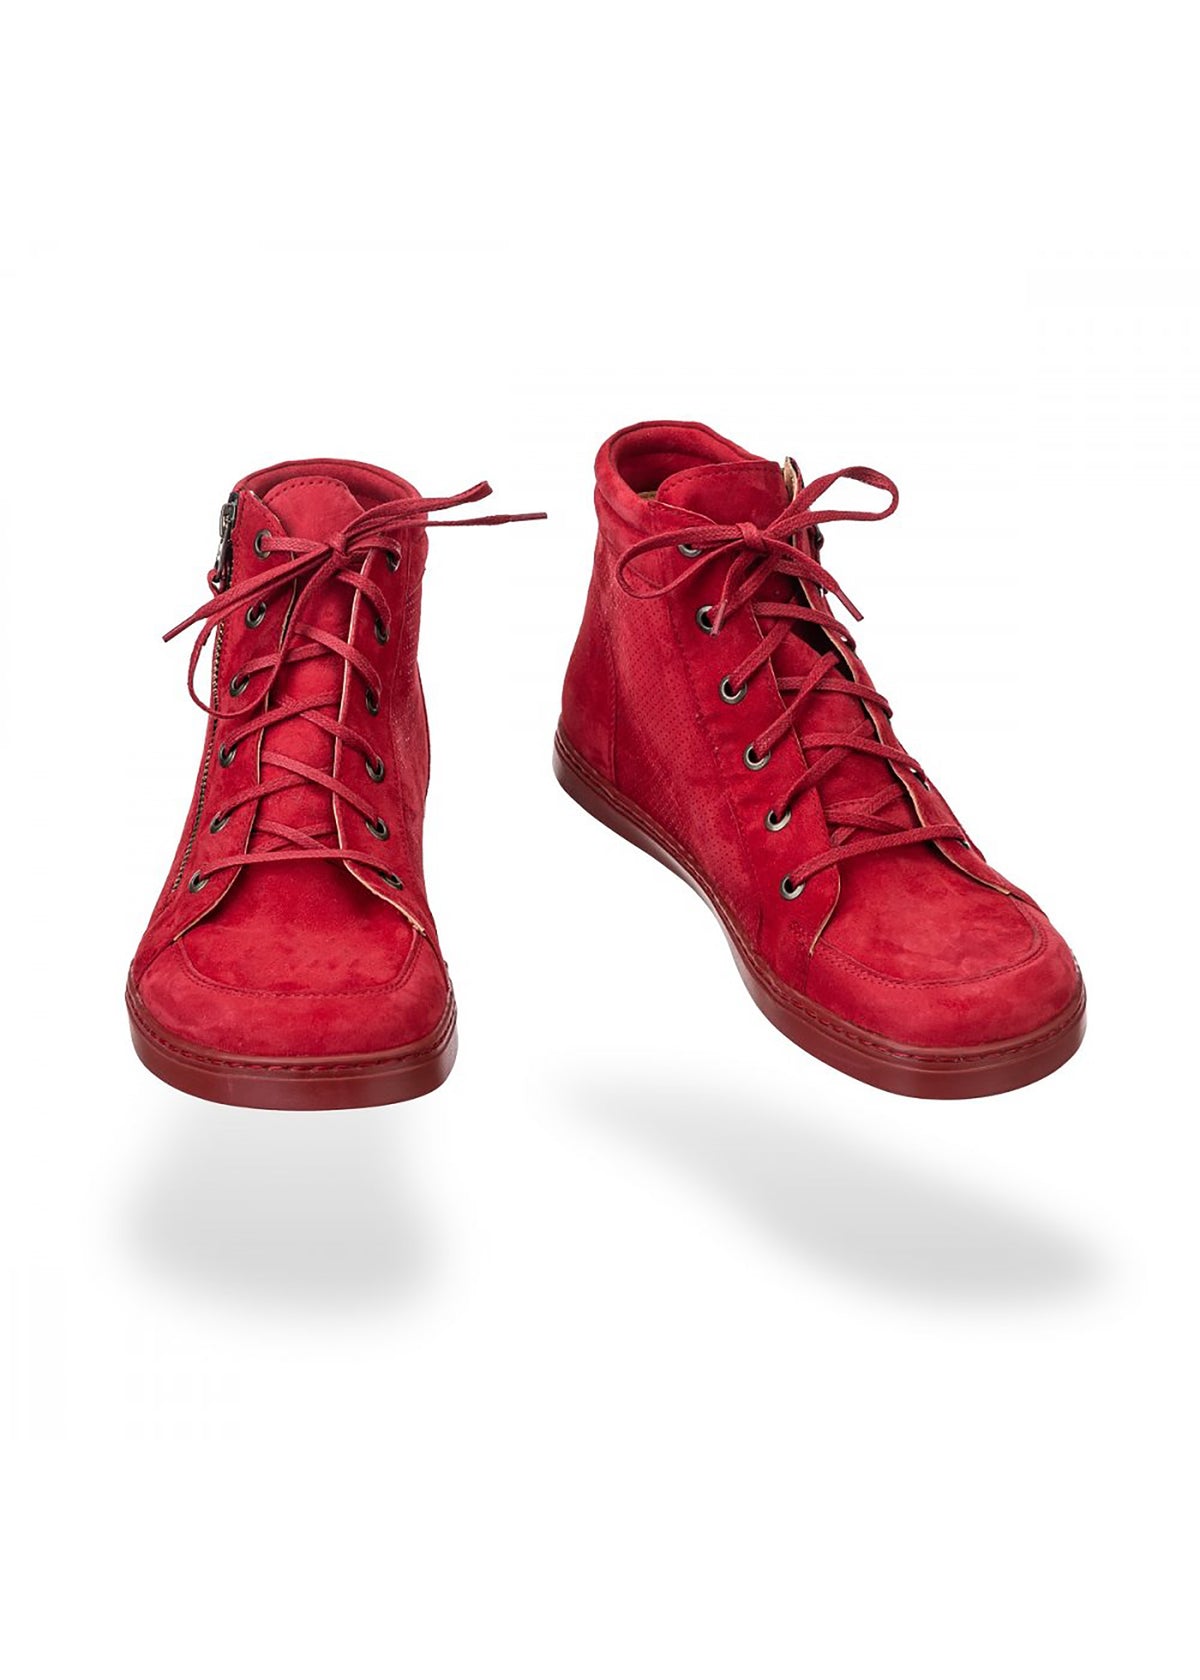 Barefoot shoes, High top sneakers - Rex Red